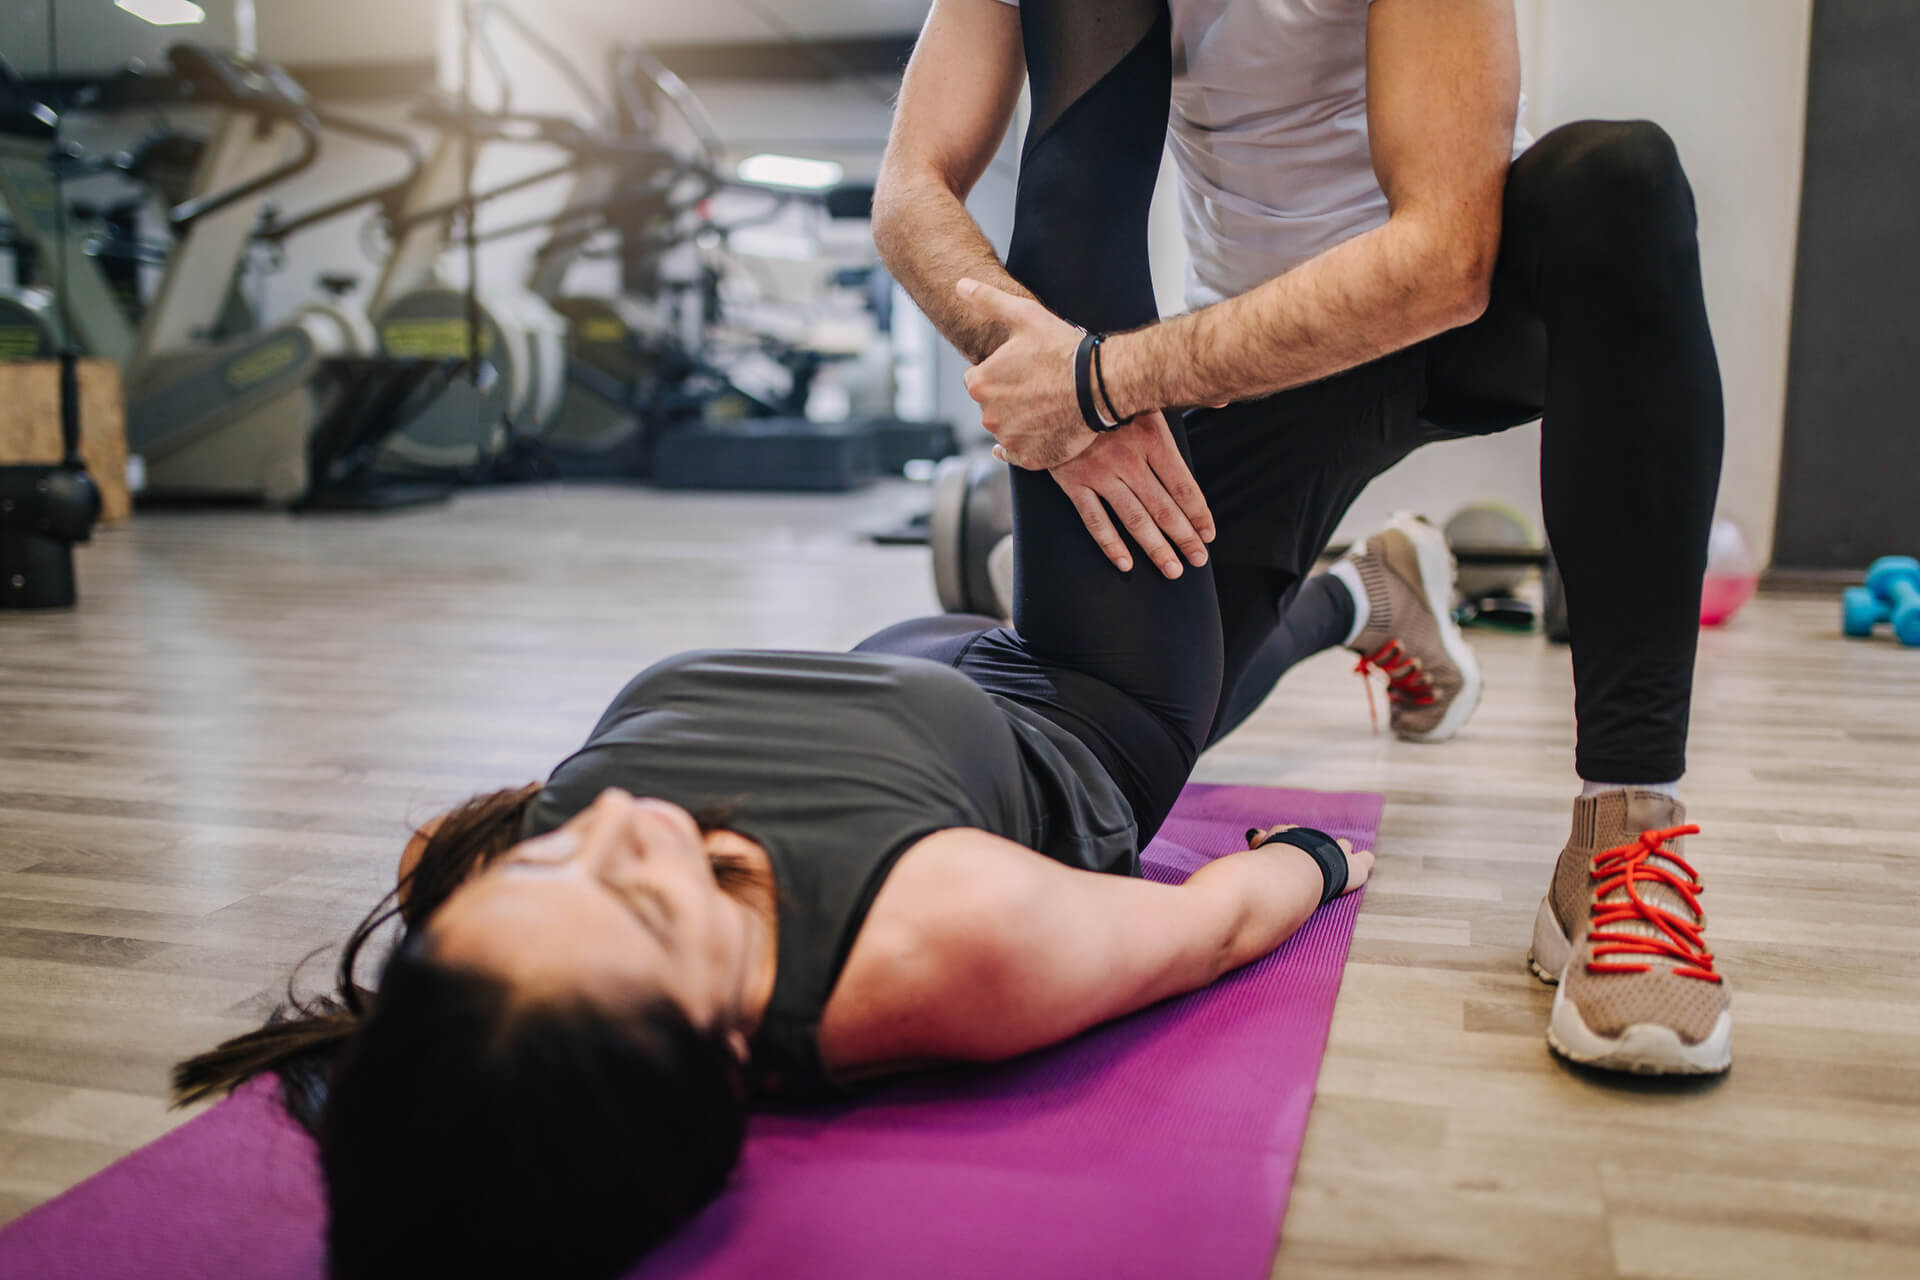 Physio applies stretch to patient in a gym